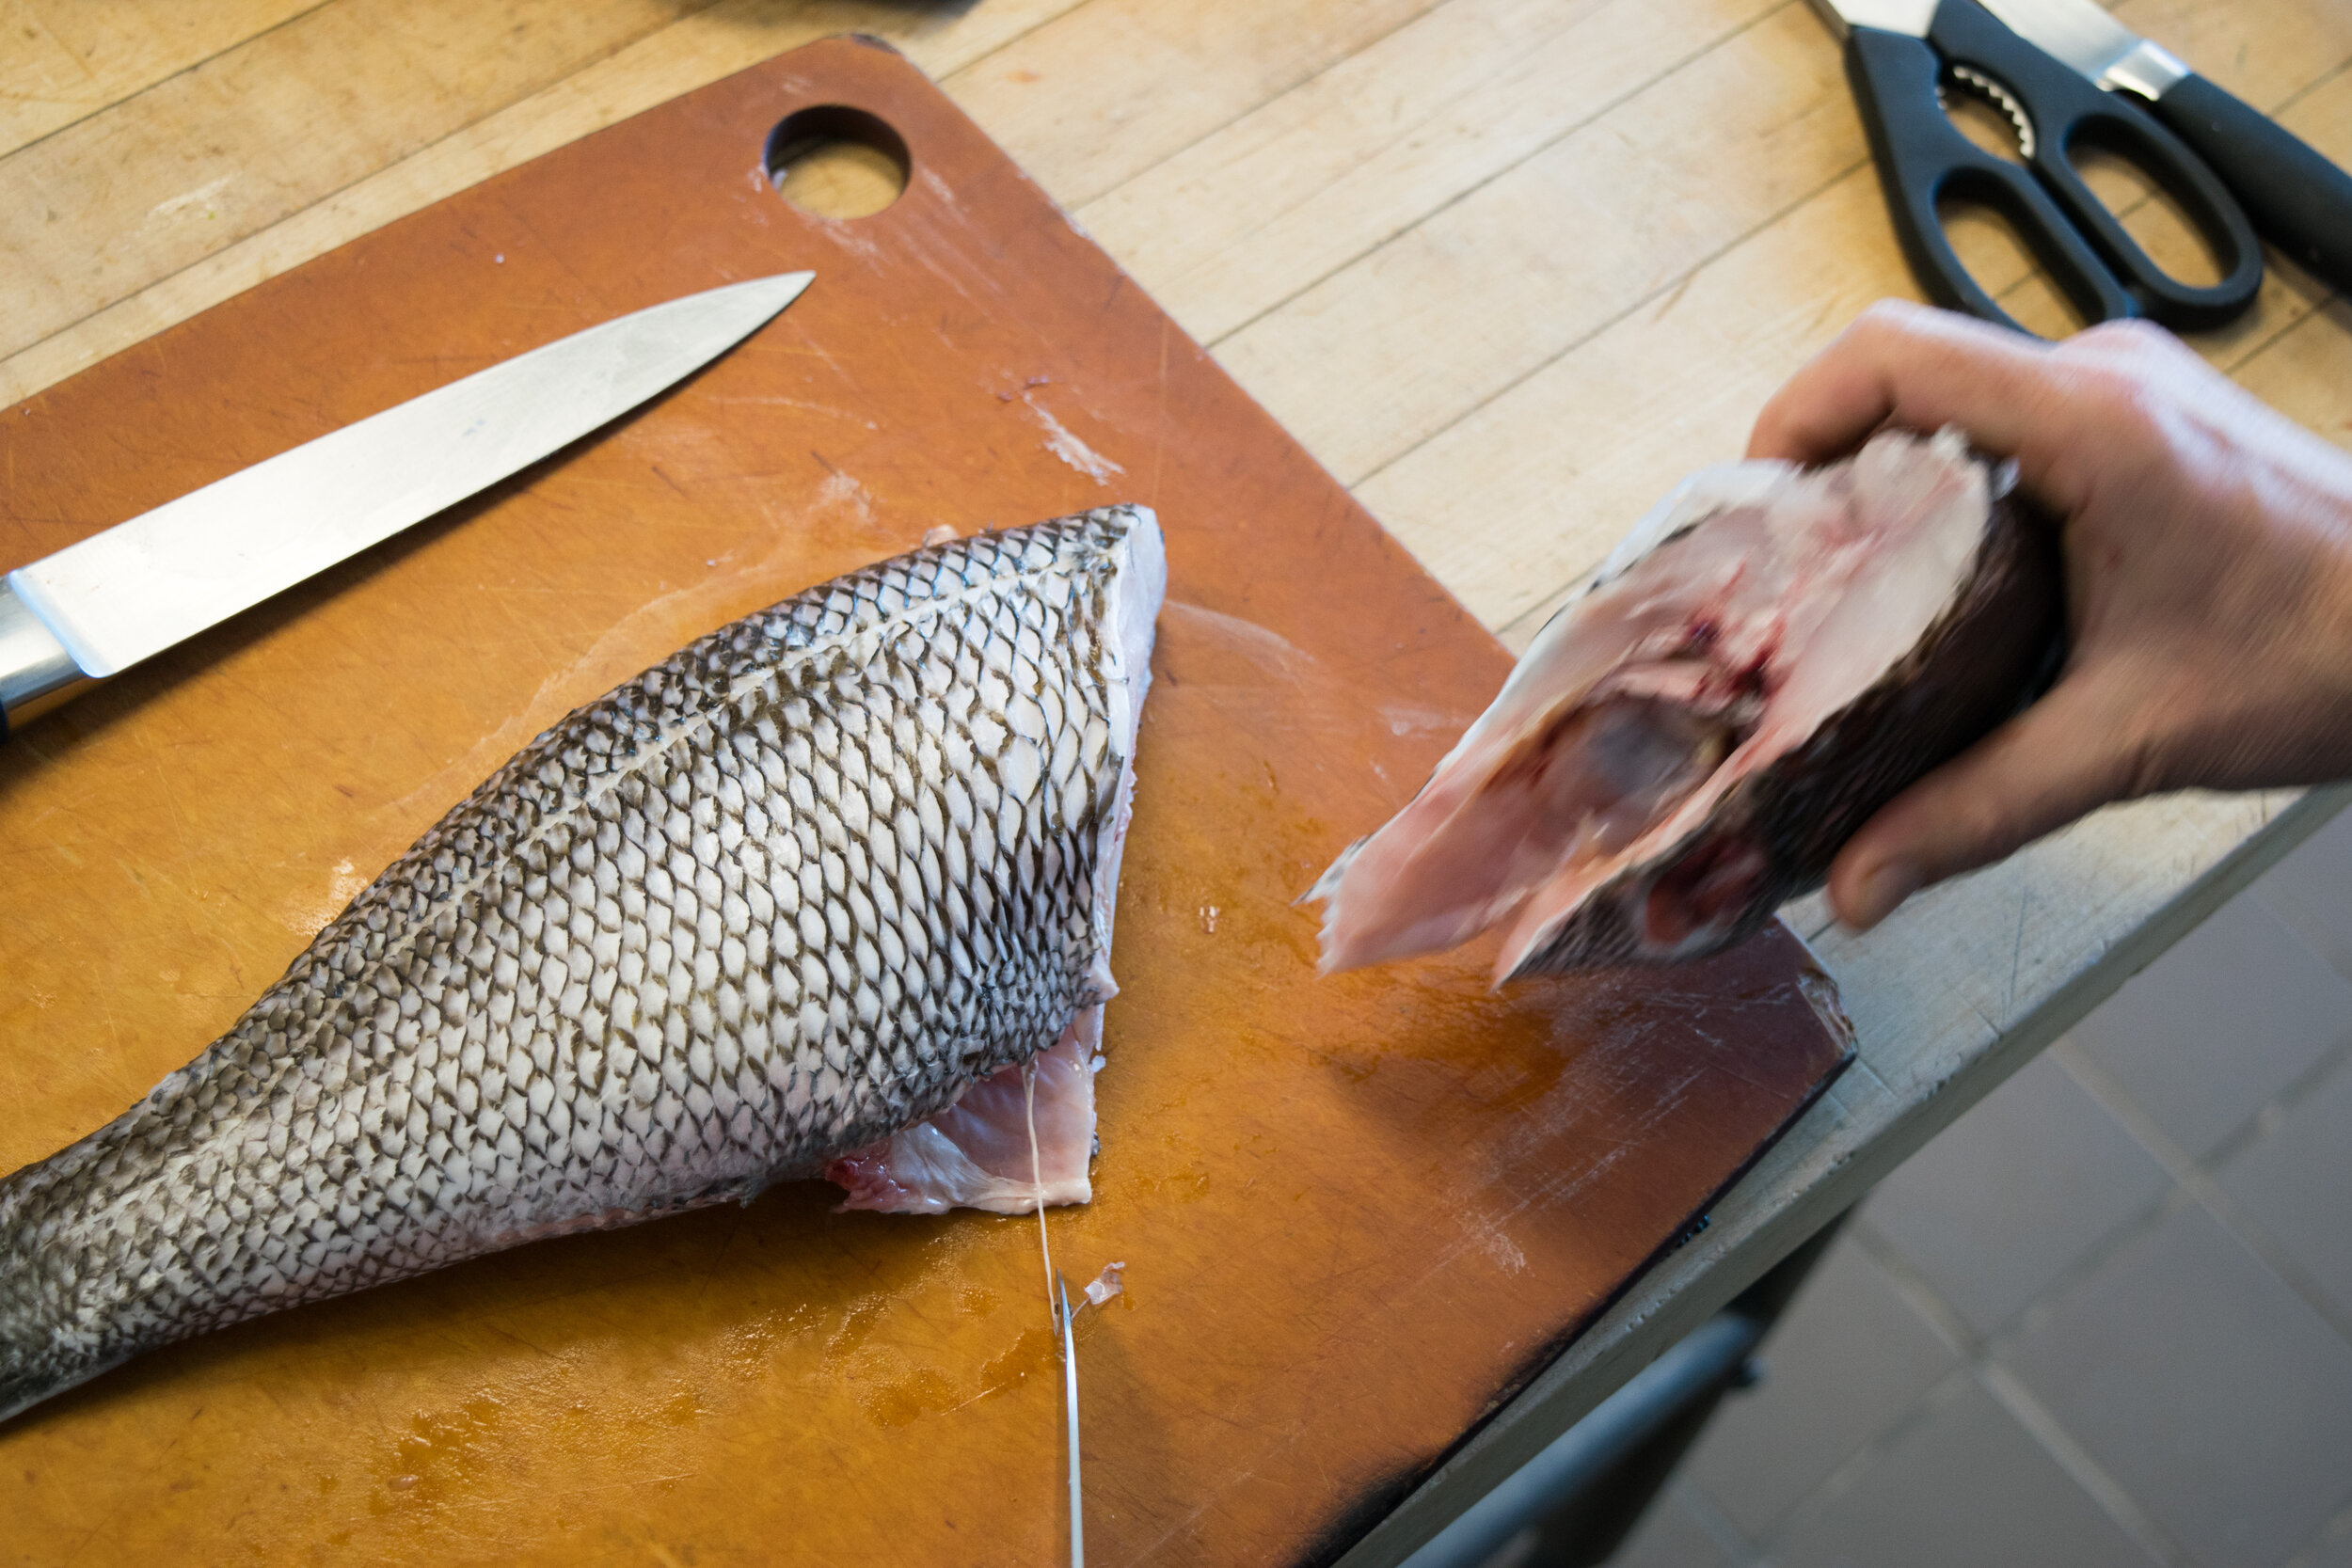 Step 4. Cut through the spine of the fish and separate the head.